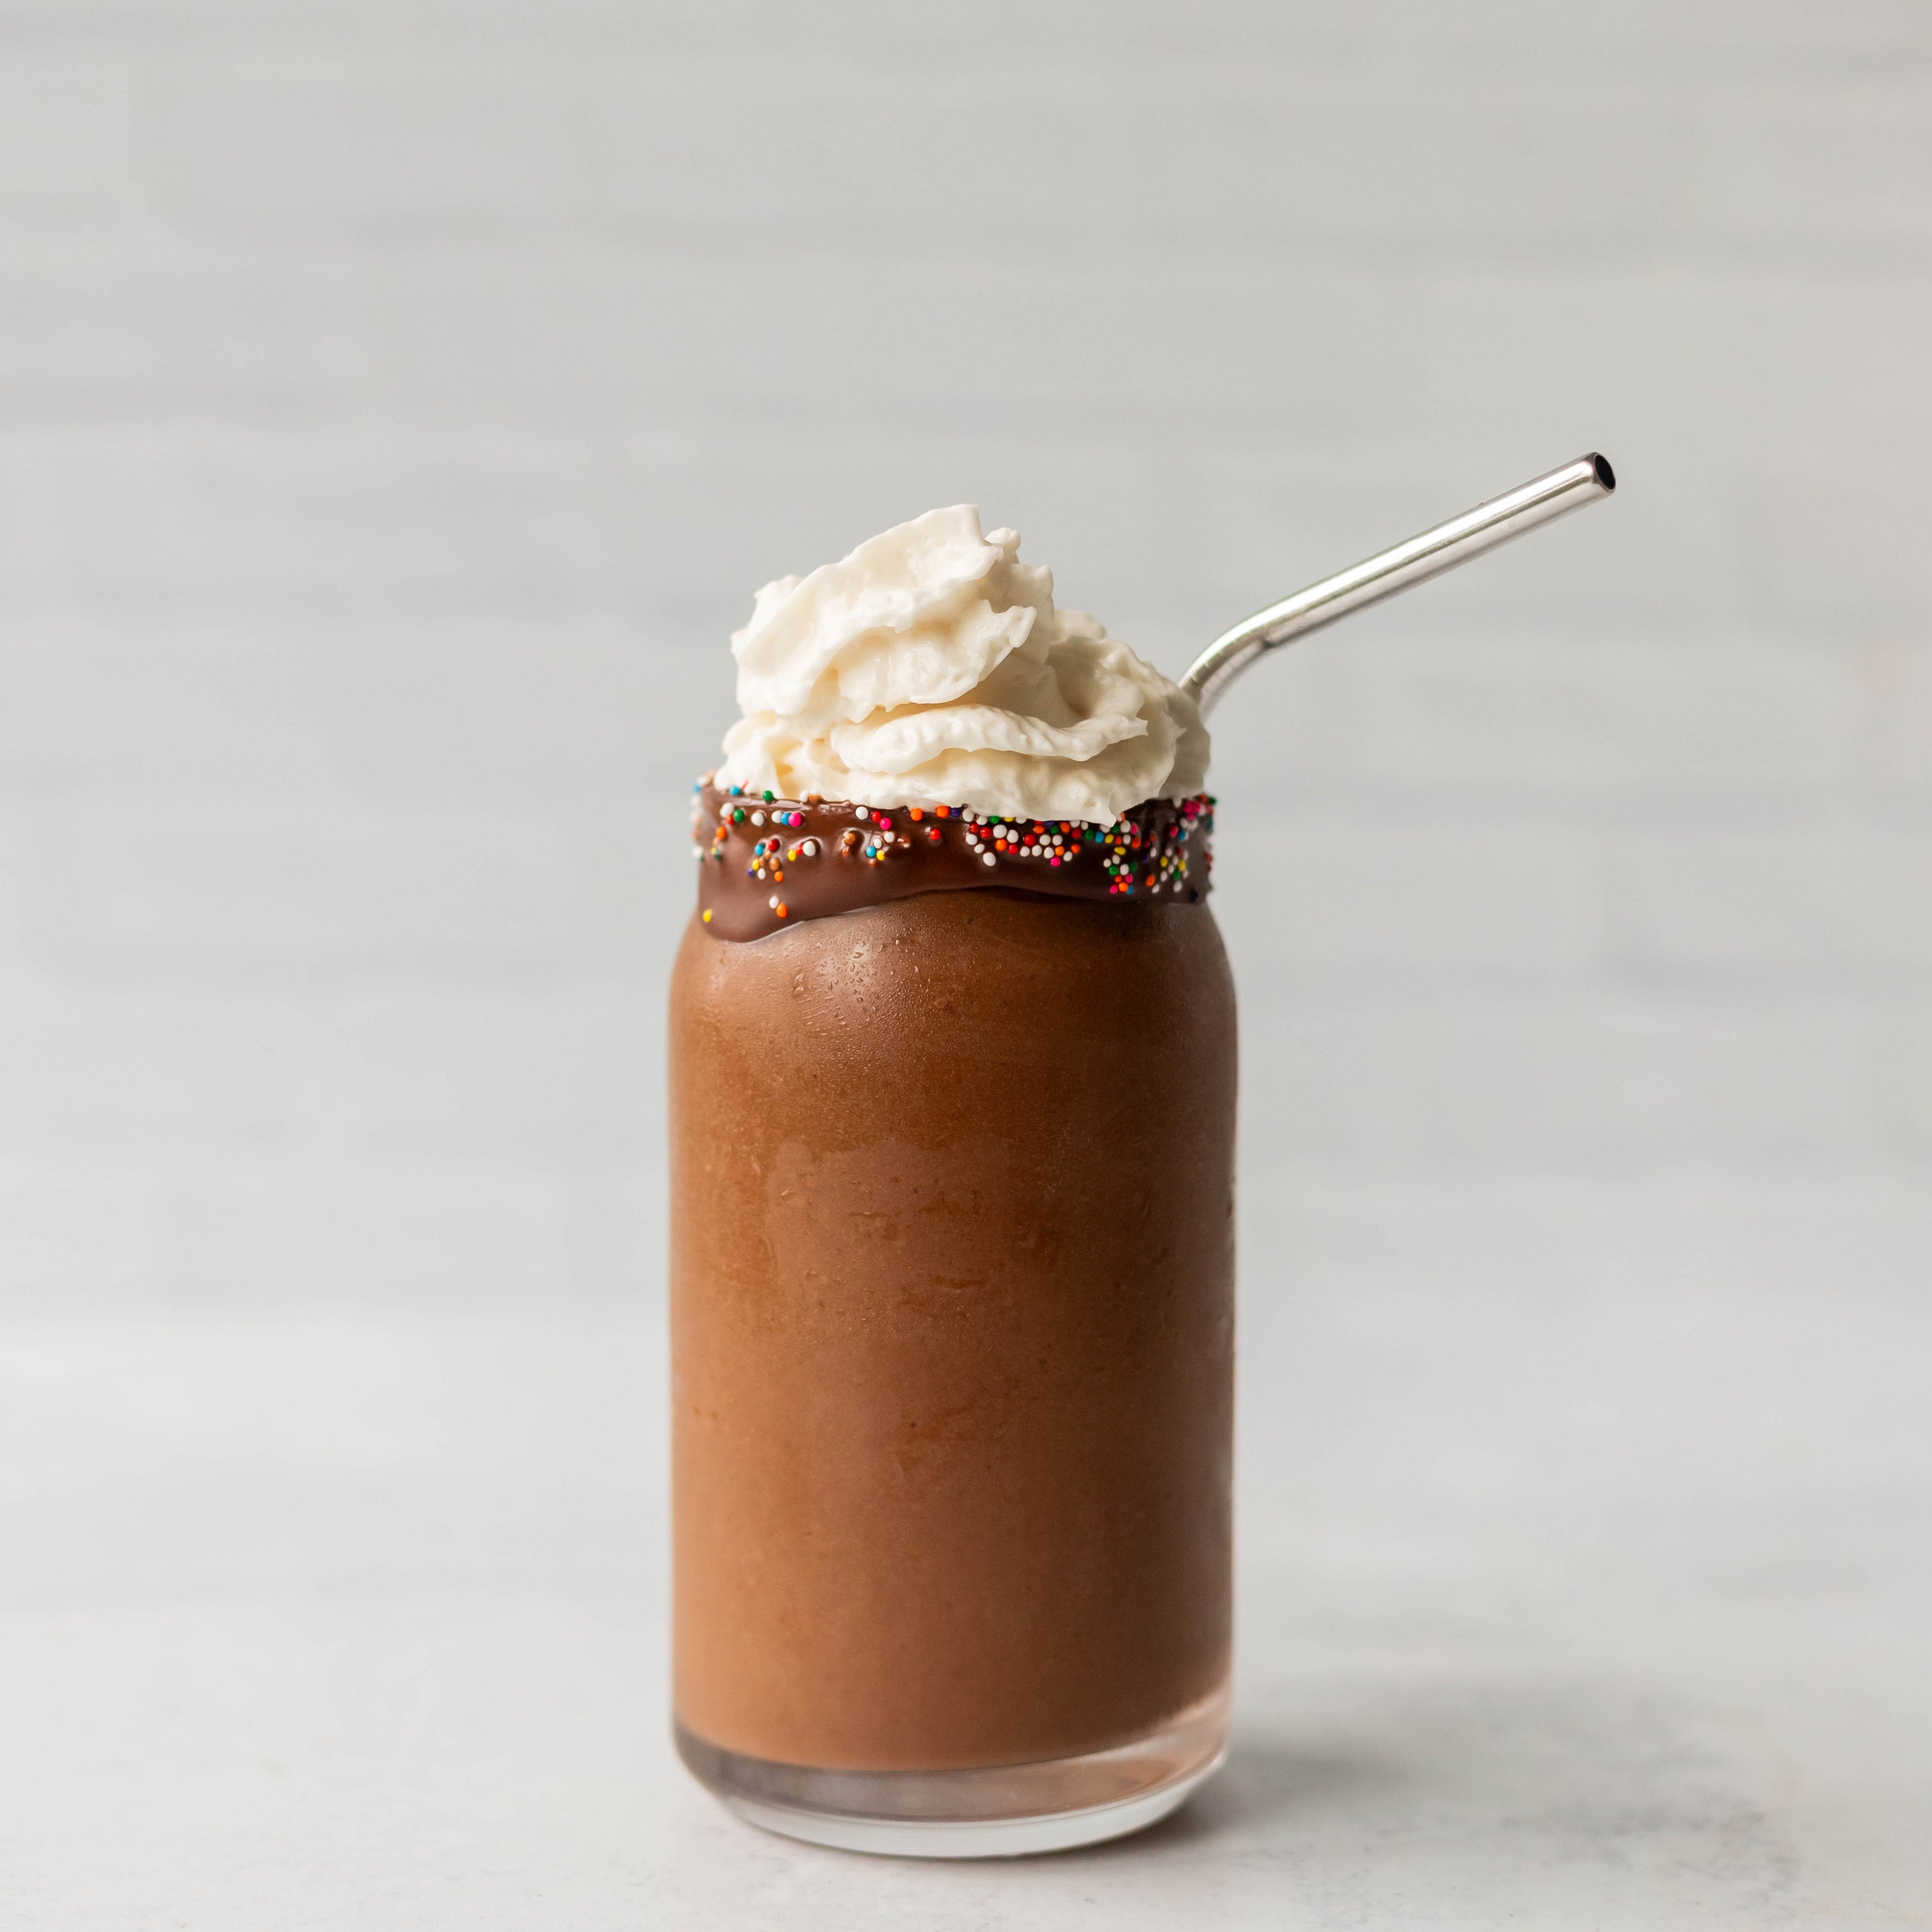 Chocolate Protein Shake with Whipped Cream